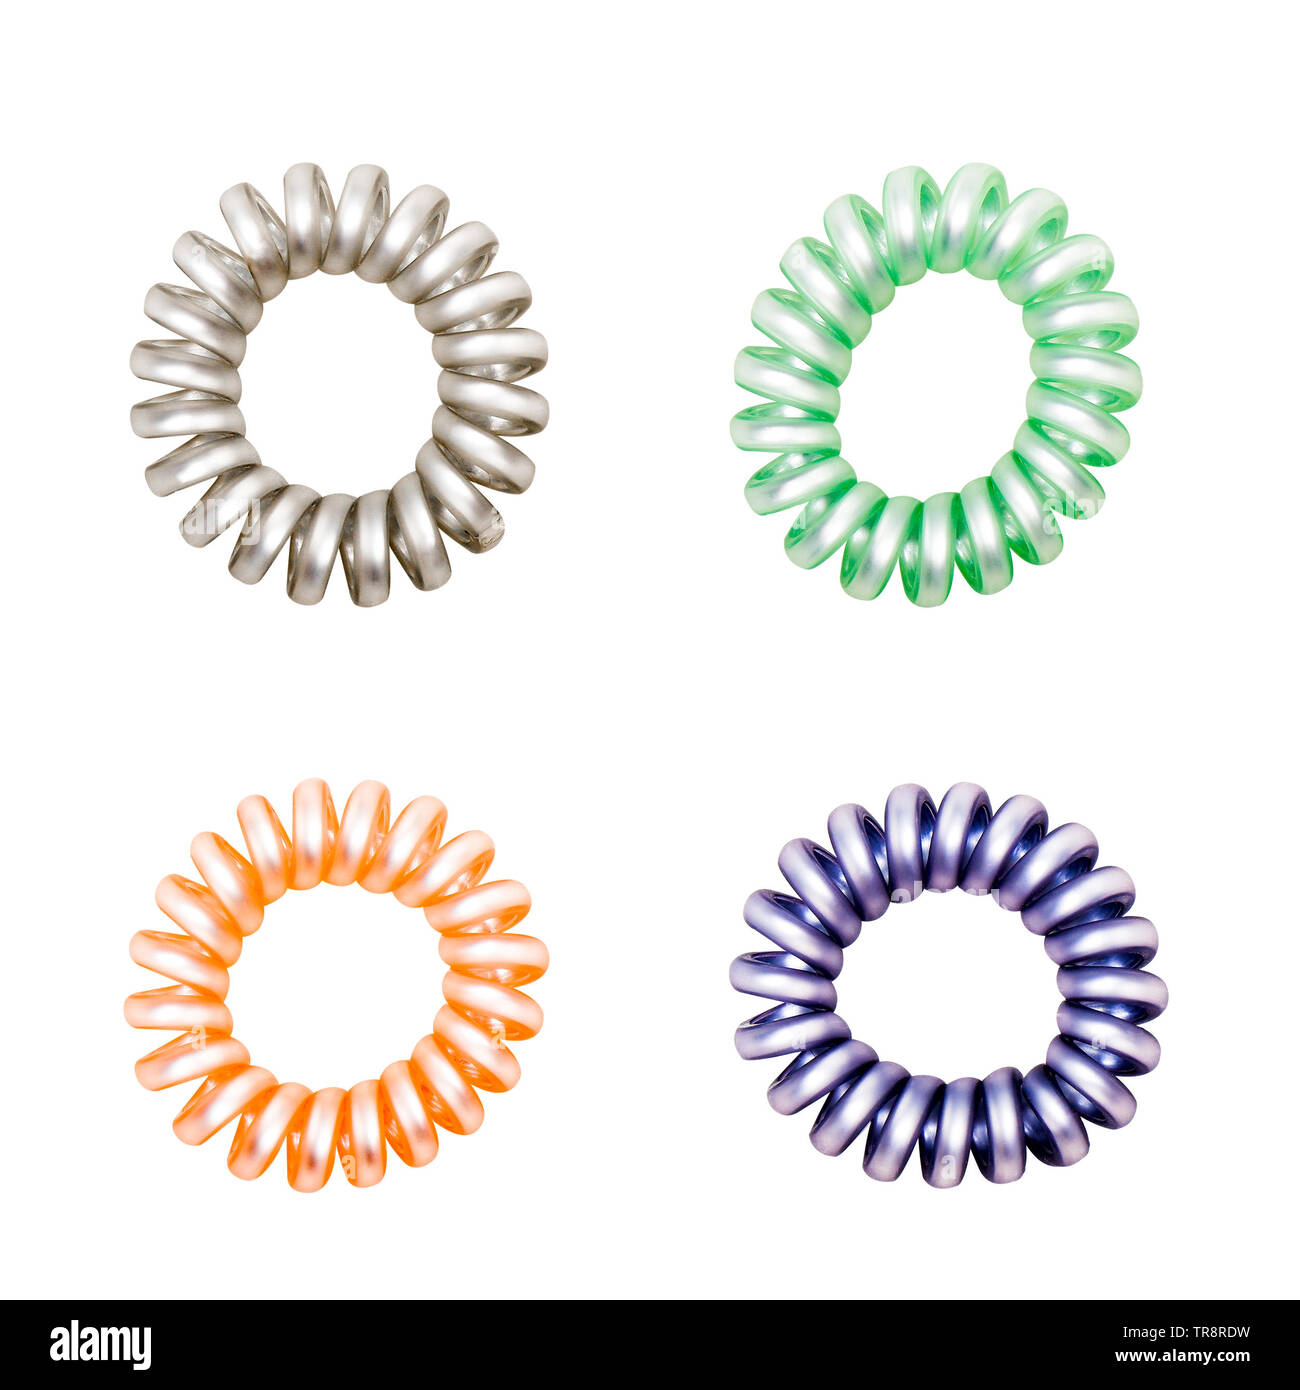 Colorful Hair Band Isolated on White Background with Clipping Path. Closeup of Spiral Four Colorful Rubber Bands for Fashion Accessories. Beautiful Stock Photo